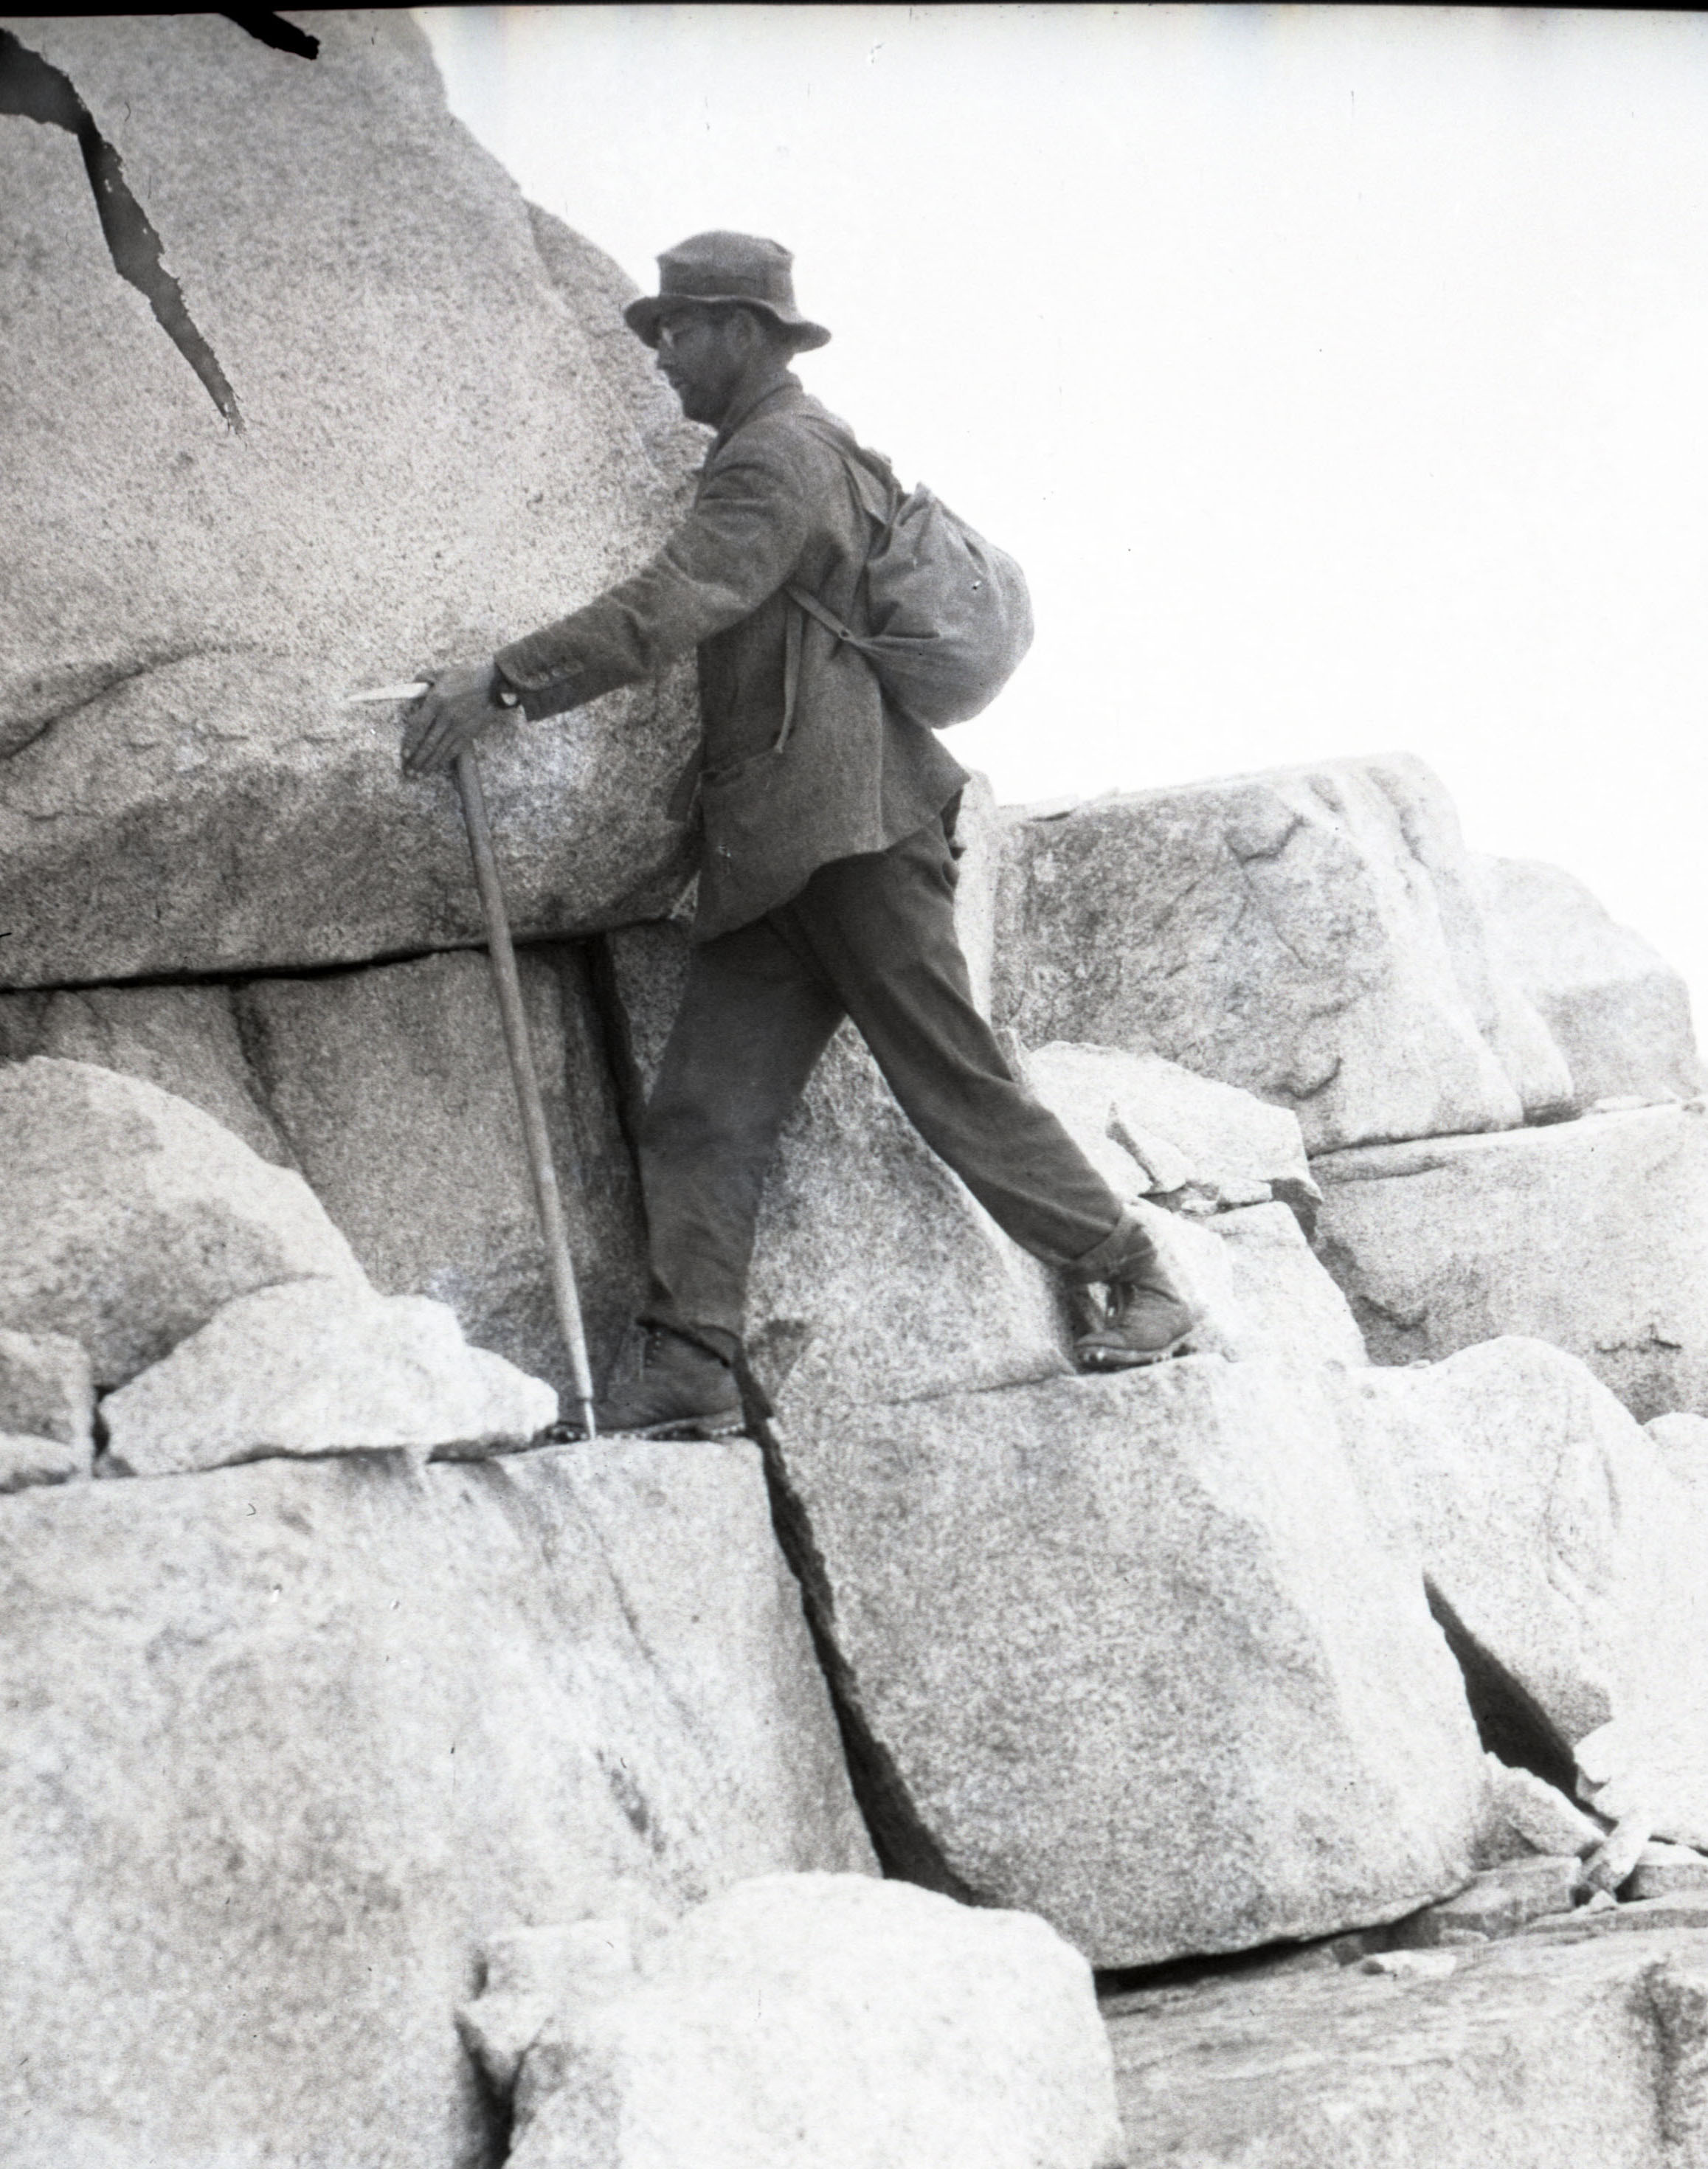  A climber ascending a rock face, using his ice axe as a walking stick. From the collections of the American Alpine Club. 